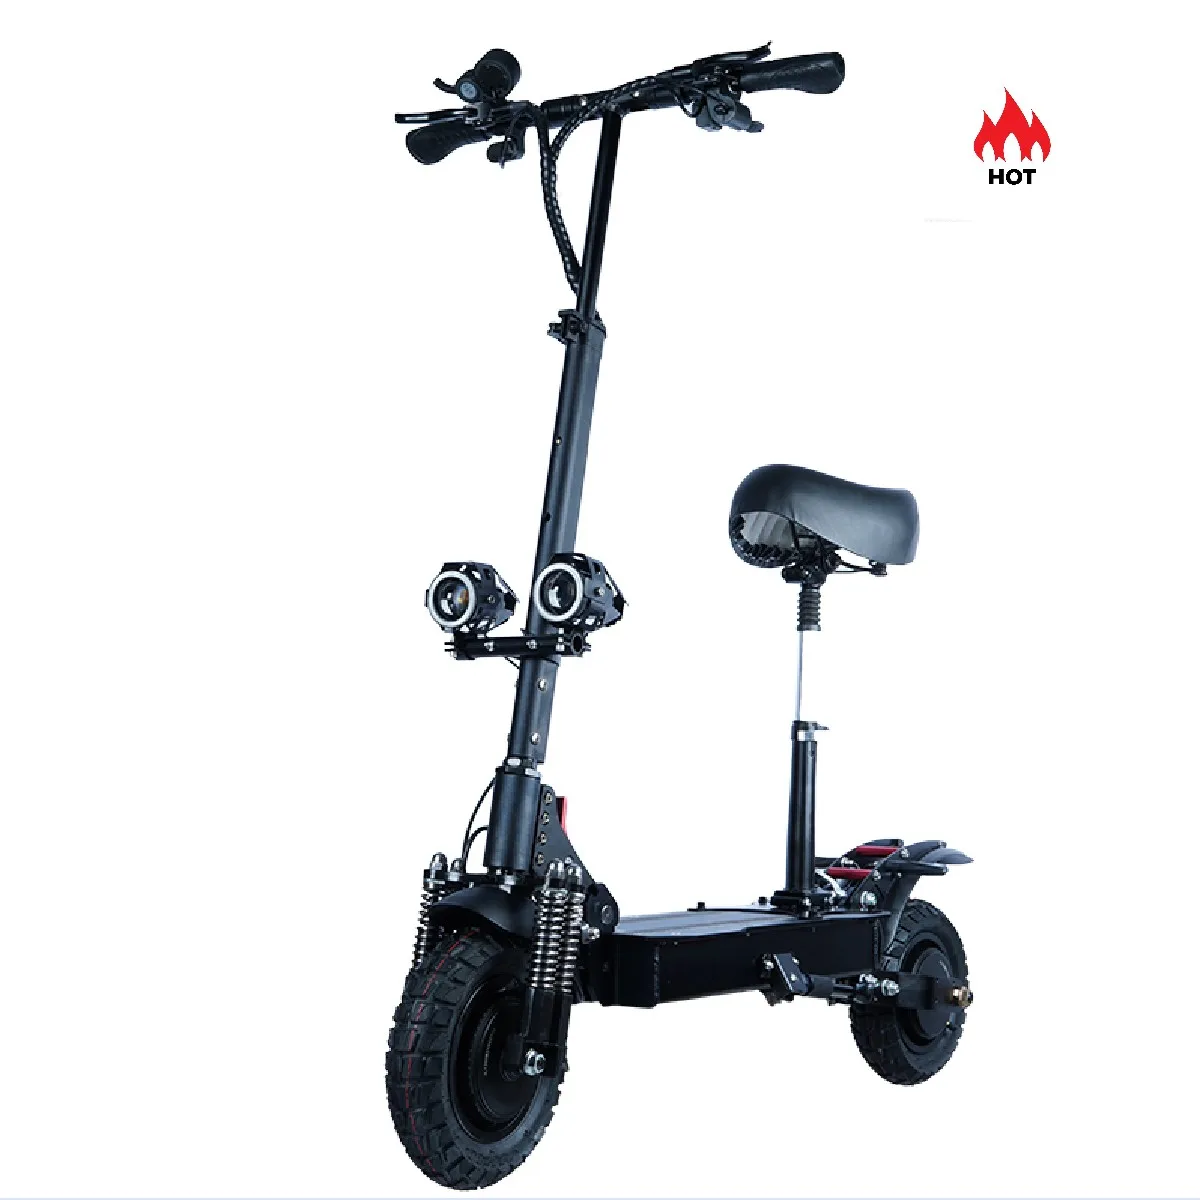 

USA Warehouse 10 Inch Off-road Tire 60V 2400W Hot Sale Strong Powerful Electric Scooter Dual Motor